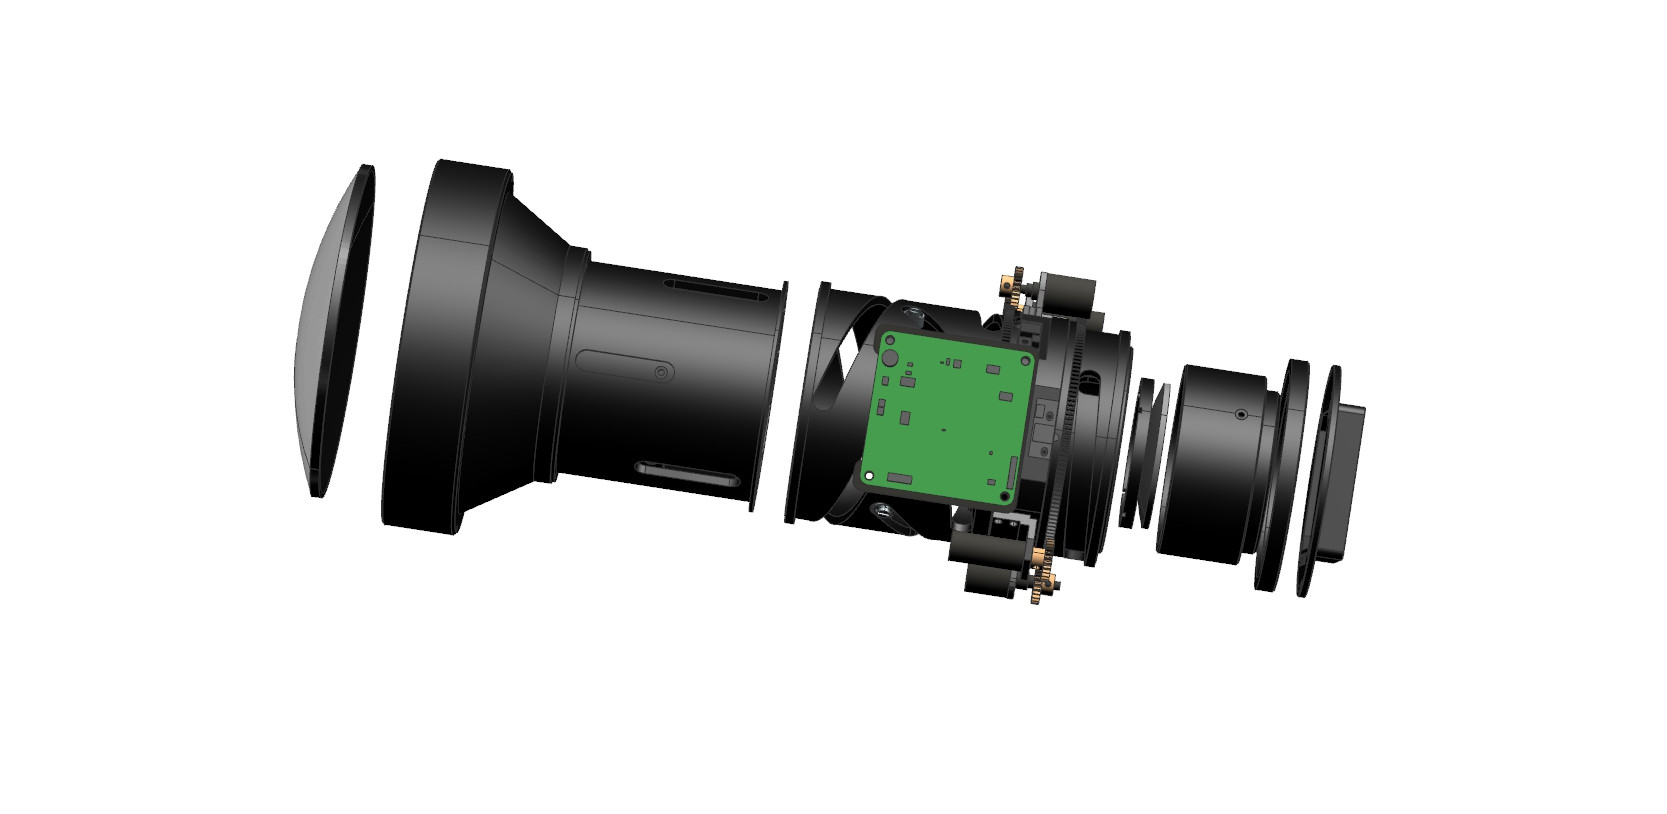 6 Reasons for the Poor Imaging Quality of Infrared Continuous Zoom Lenses